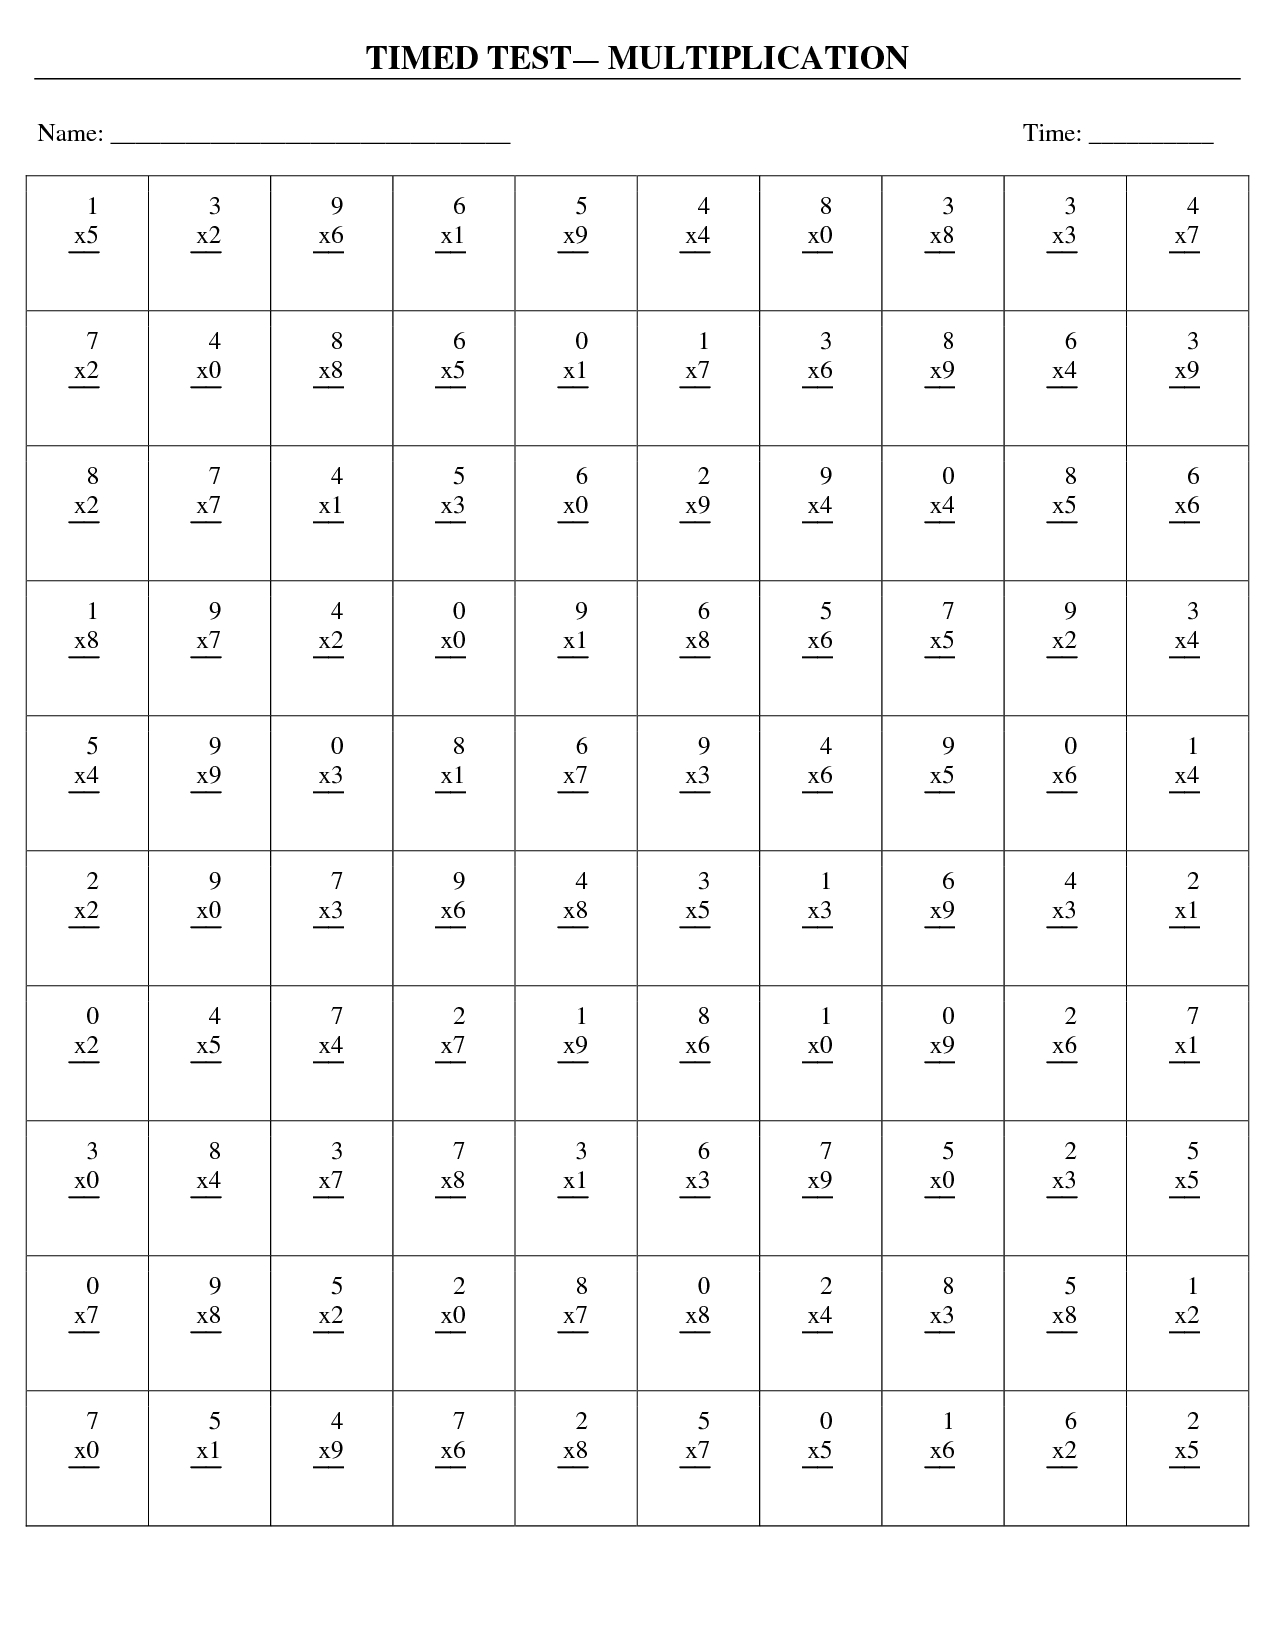 multiplication-drills-1-12-times-tables-worksheets-printable-math-drills-multiplication